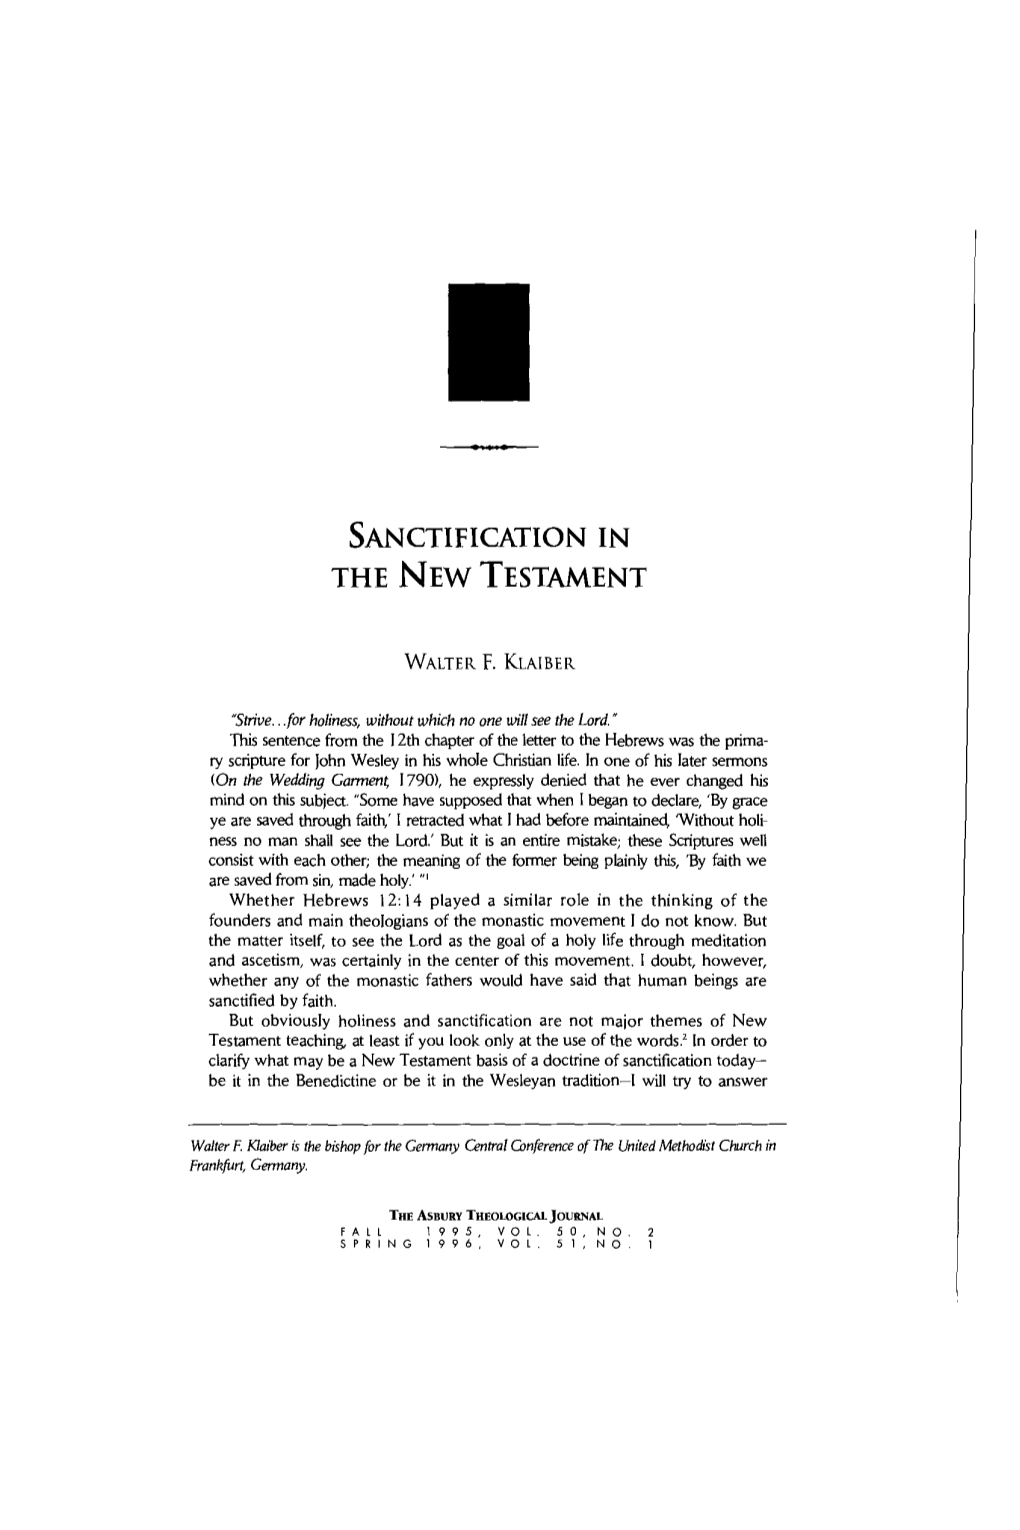 Santification in the New Testament